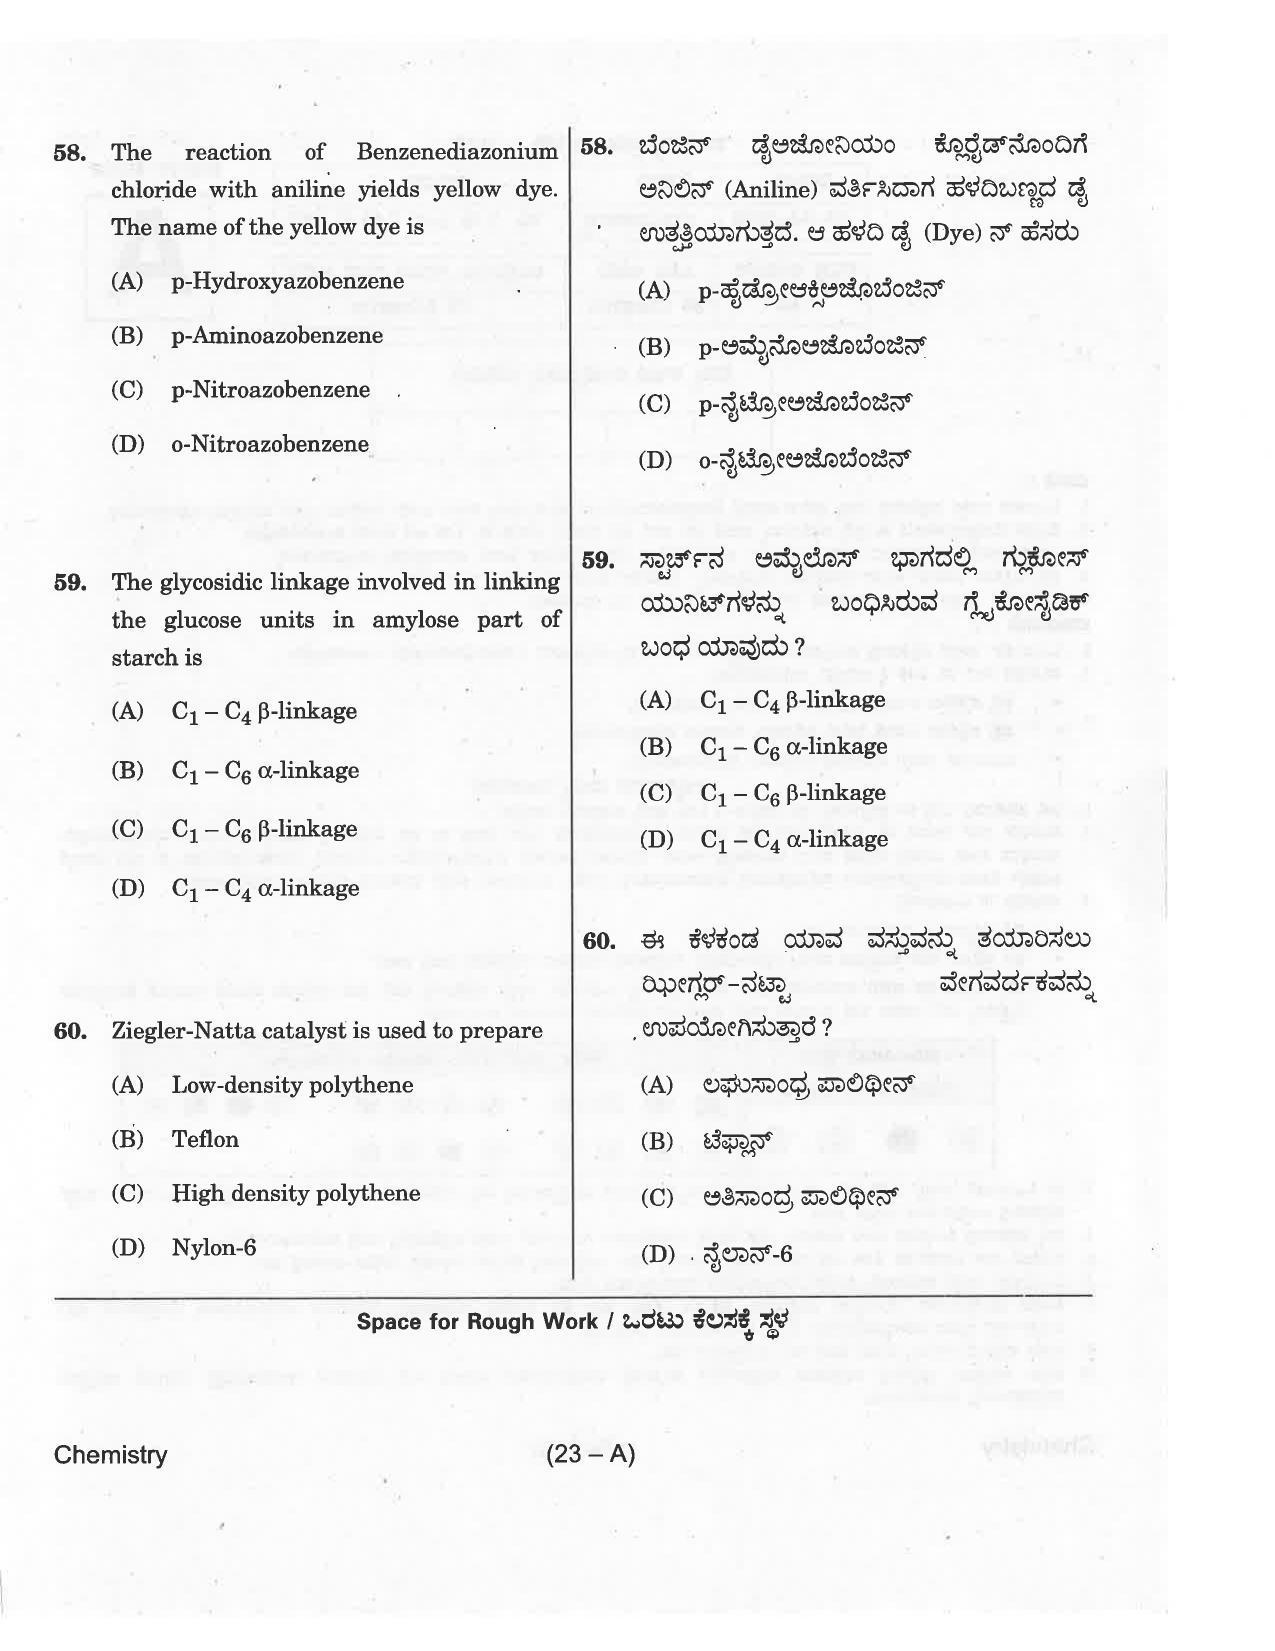 KCET Chemistry 2018 Question Papers - Page 23